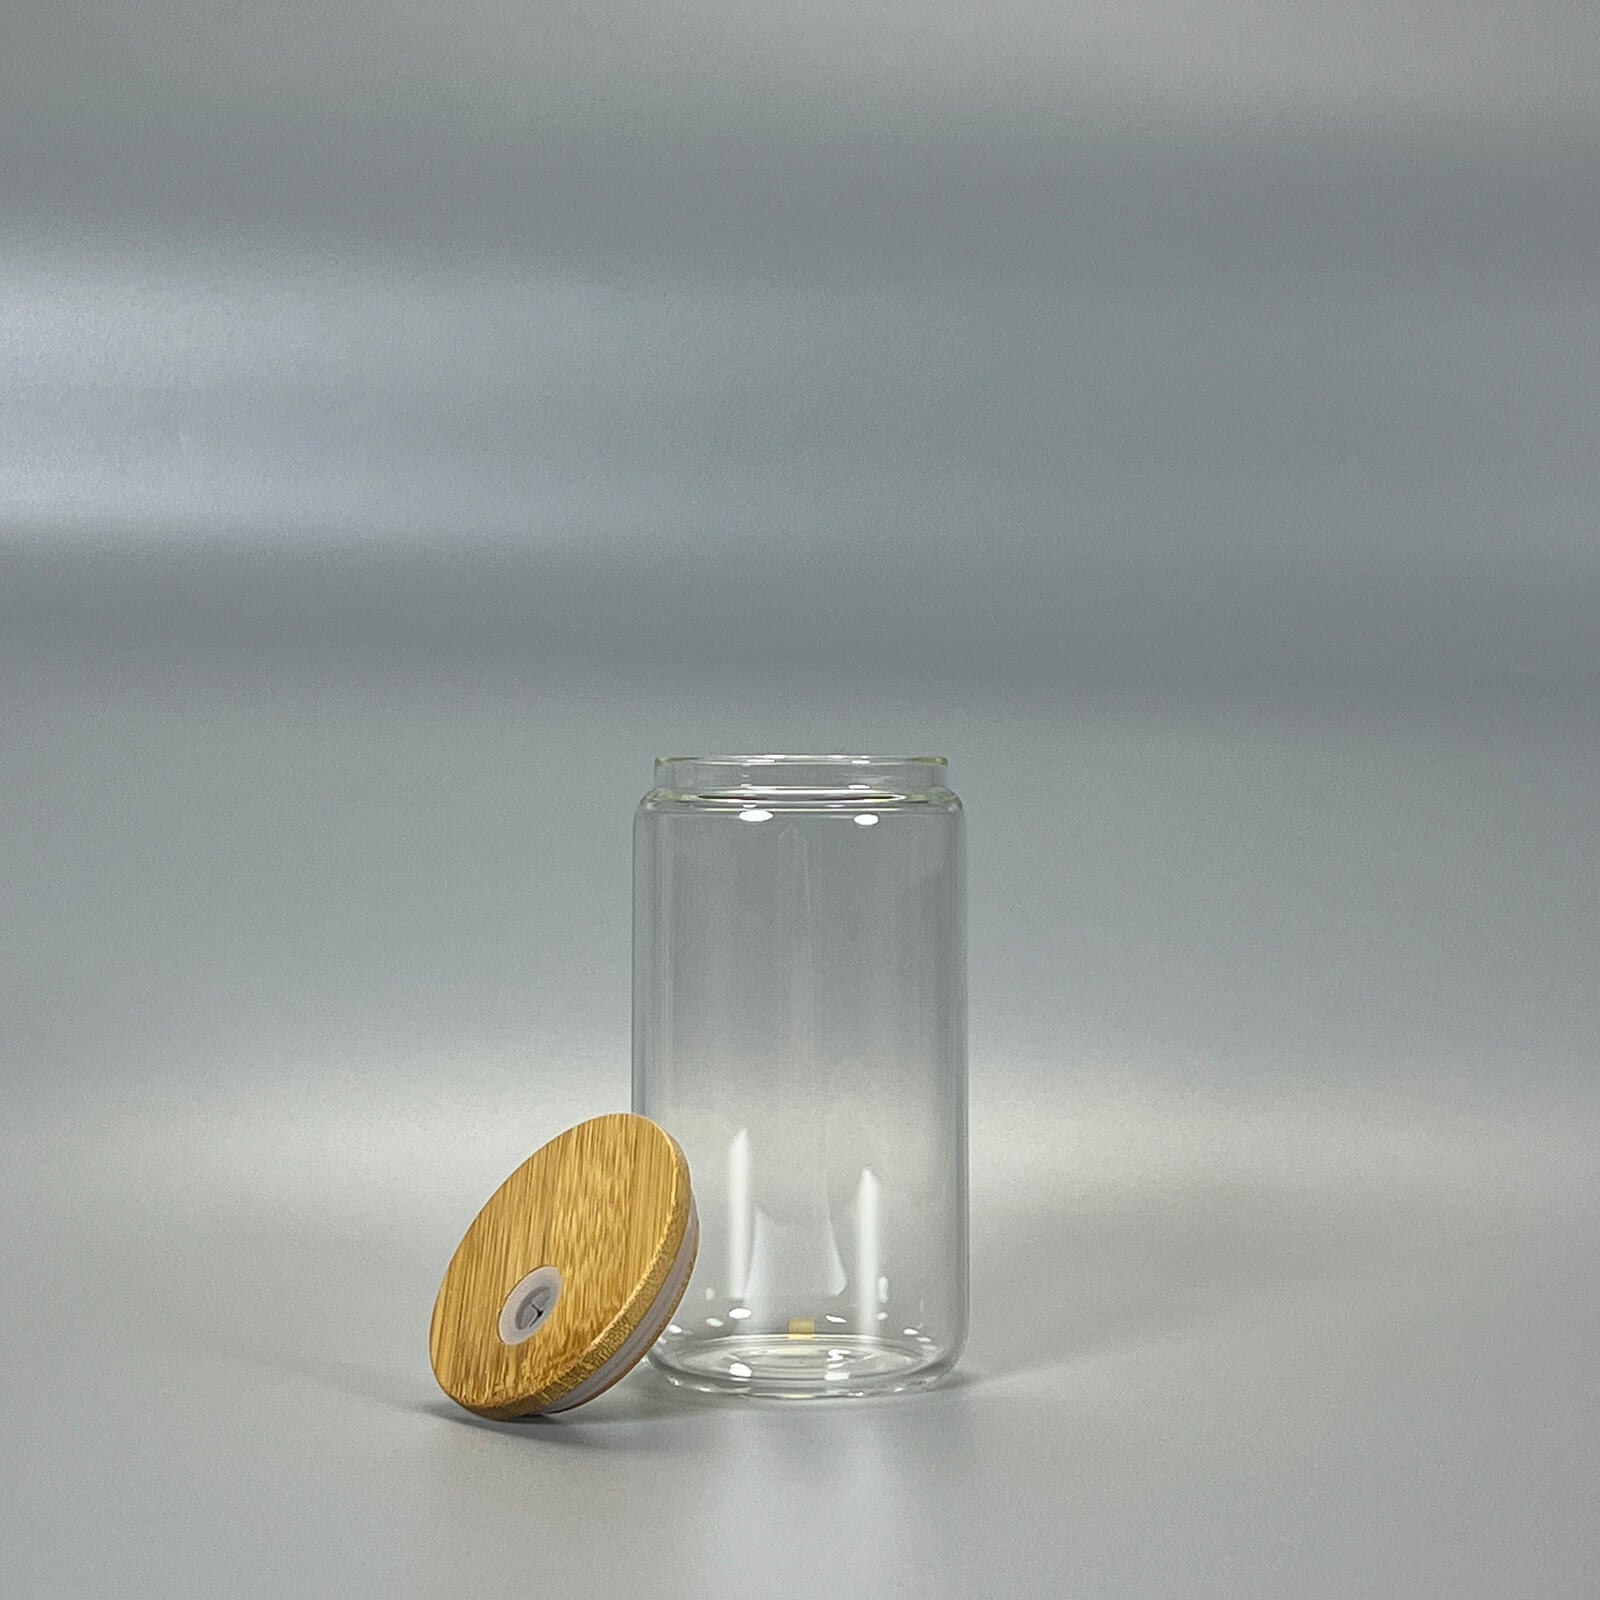 Clear Glass Can Tumbler, glass tumbler with bamboo lid, glass tumbler straw, glass cups with lids and straws, glass cup with straw, glass straw tumbler, glass cup with lid, glass cup with lid and straw, glass cup with lid, glass tumbler with straw